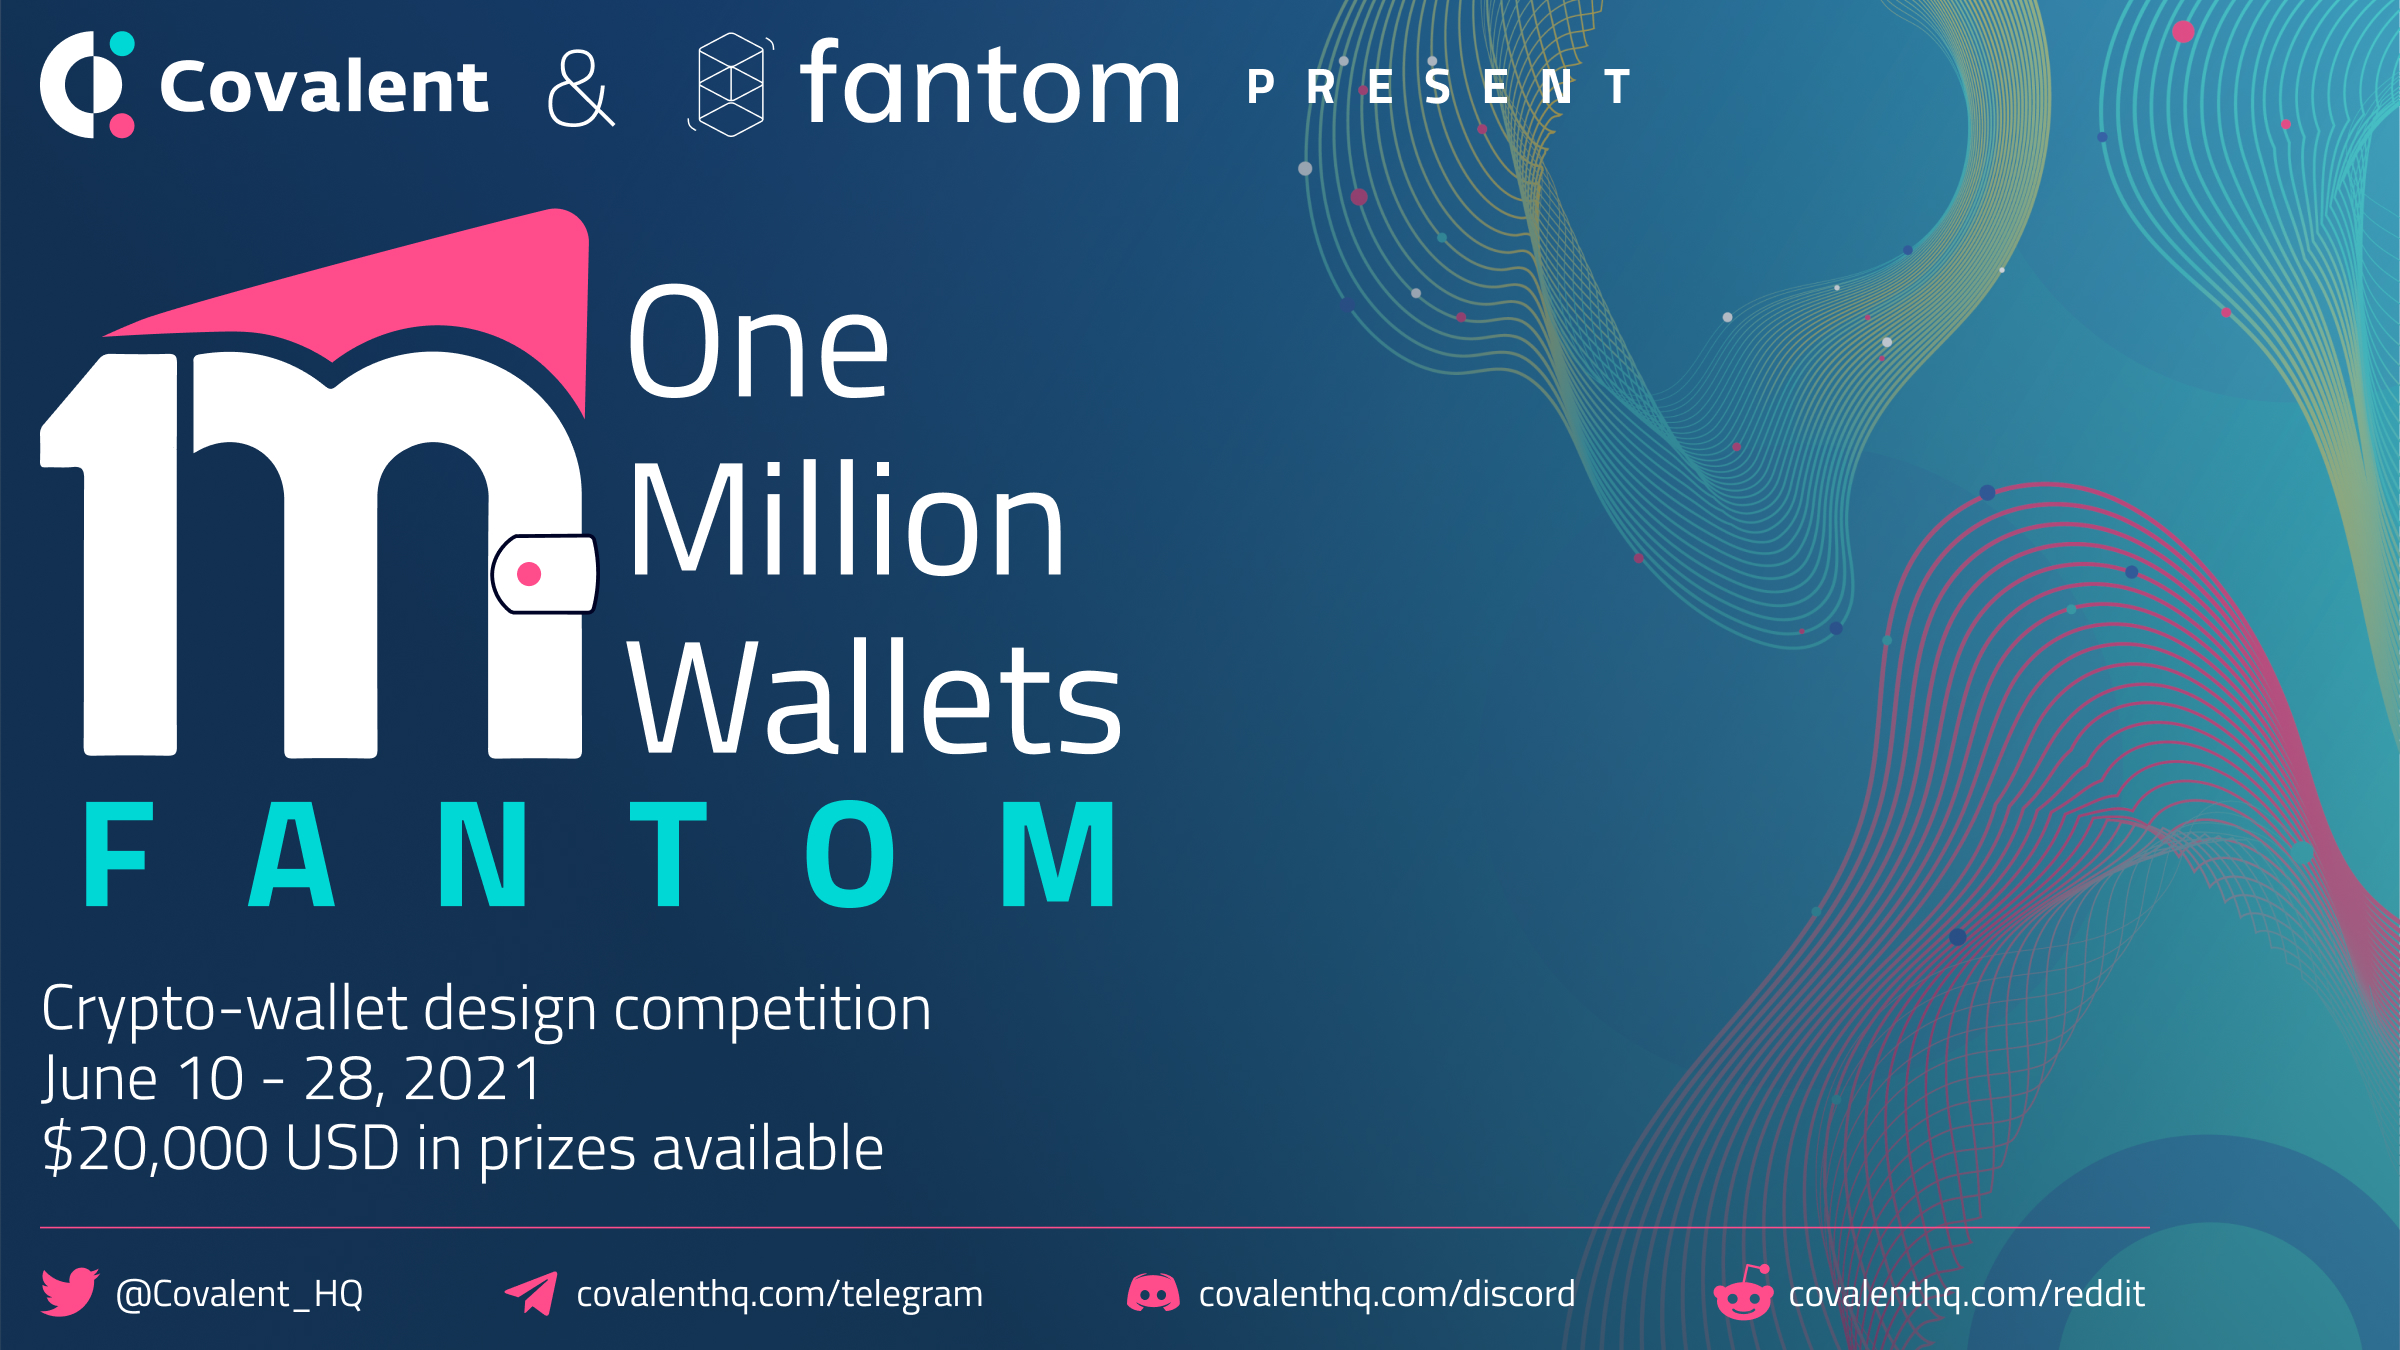 #OneMillionWallets - Fantom hackathon launches with $20,000 USD in prizes up for grabs